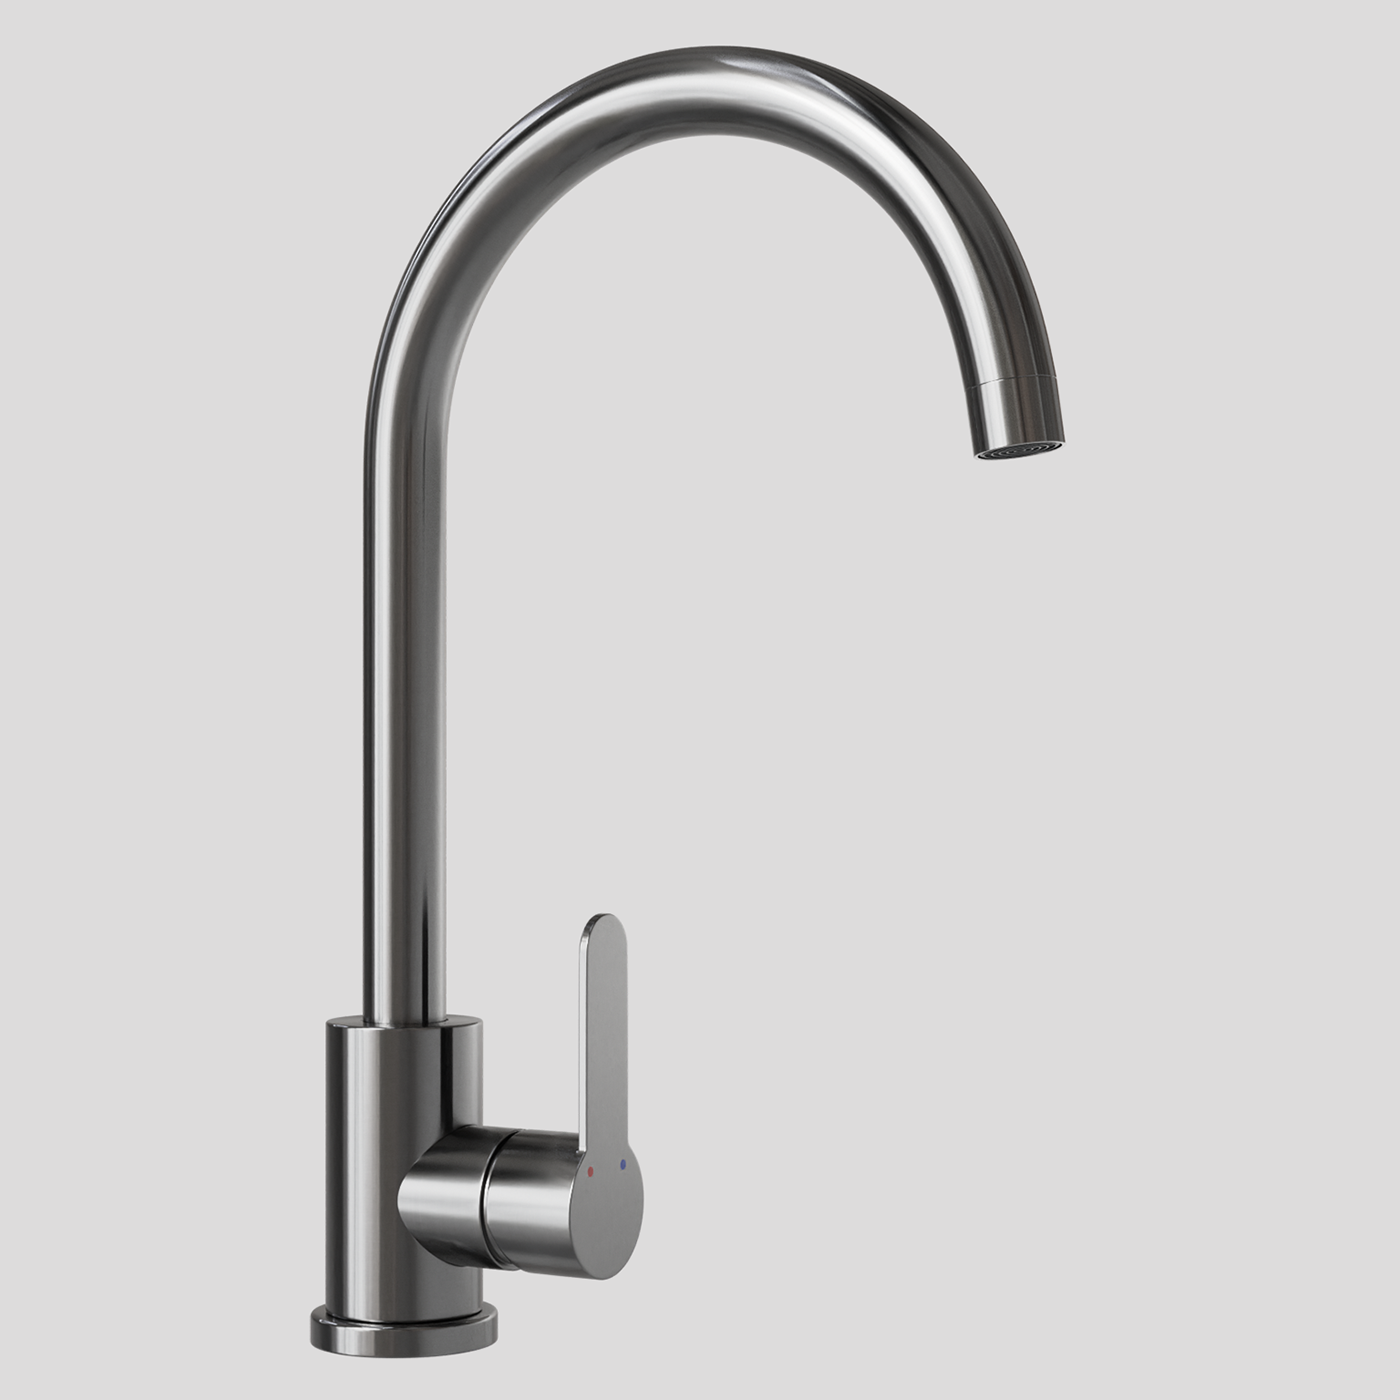 3D Faucet product Render stainless steel visualization